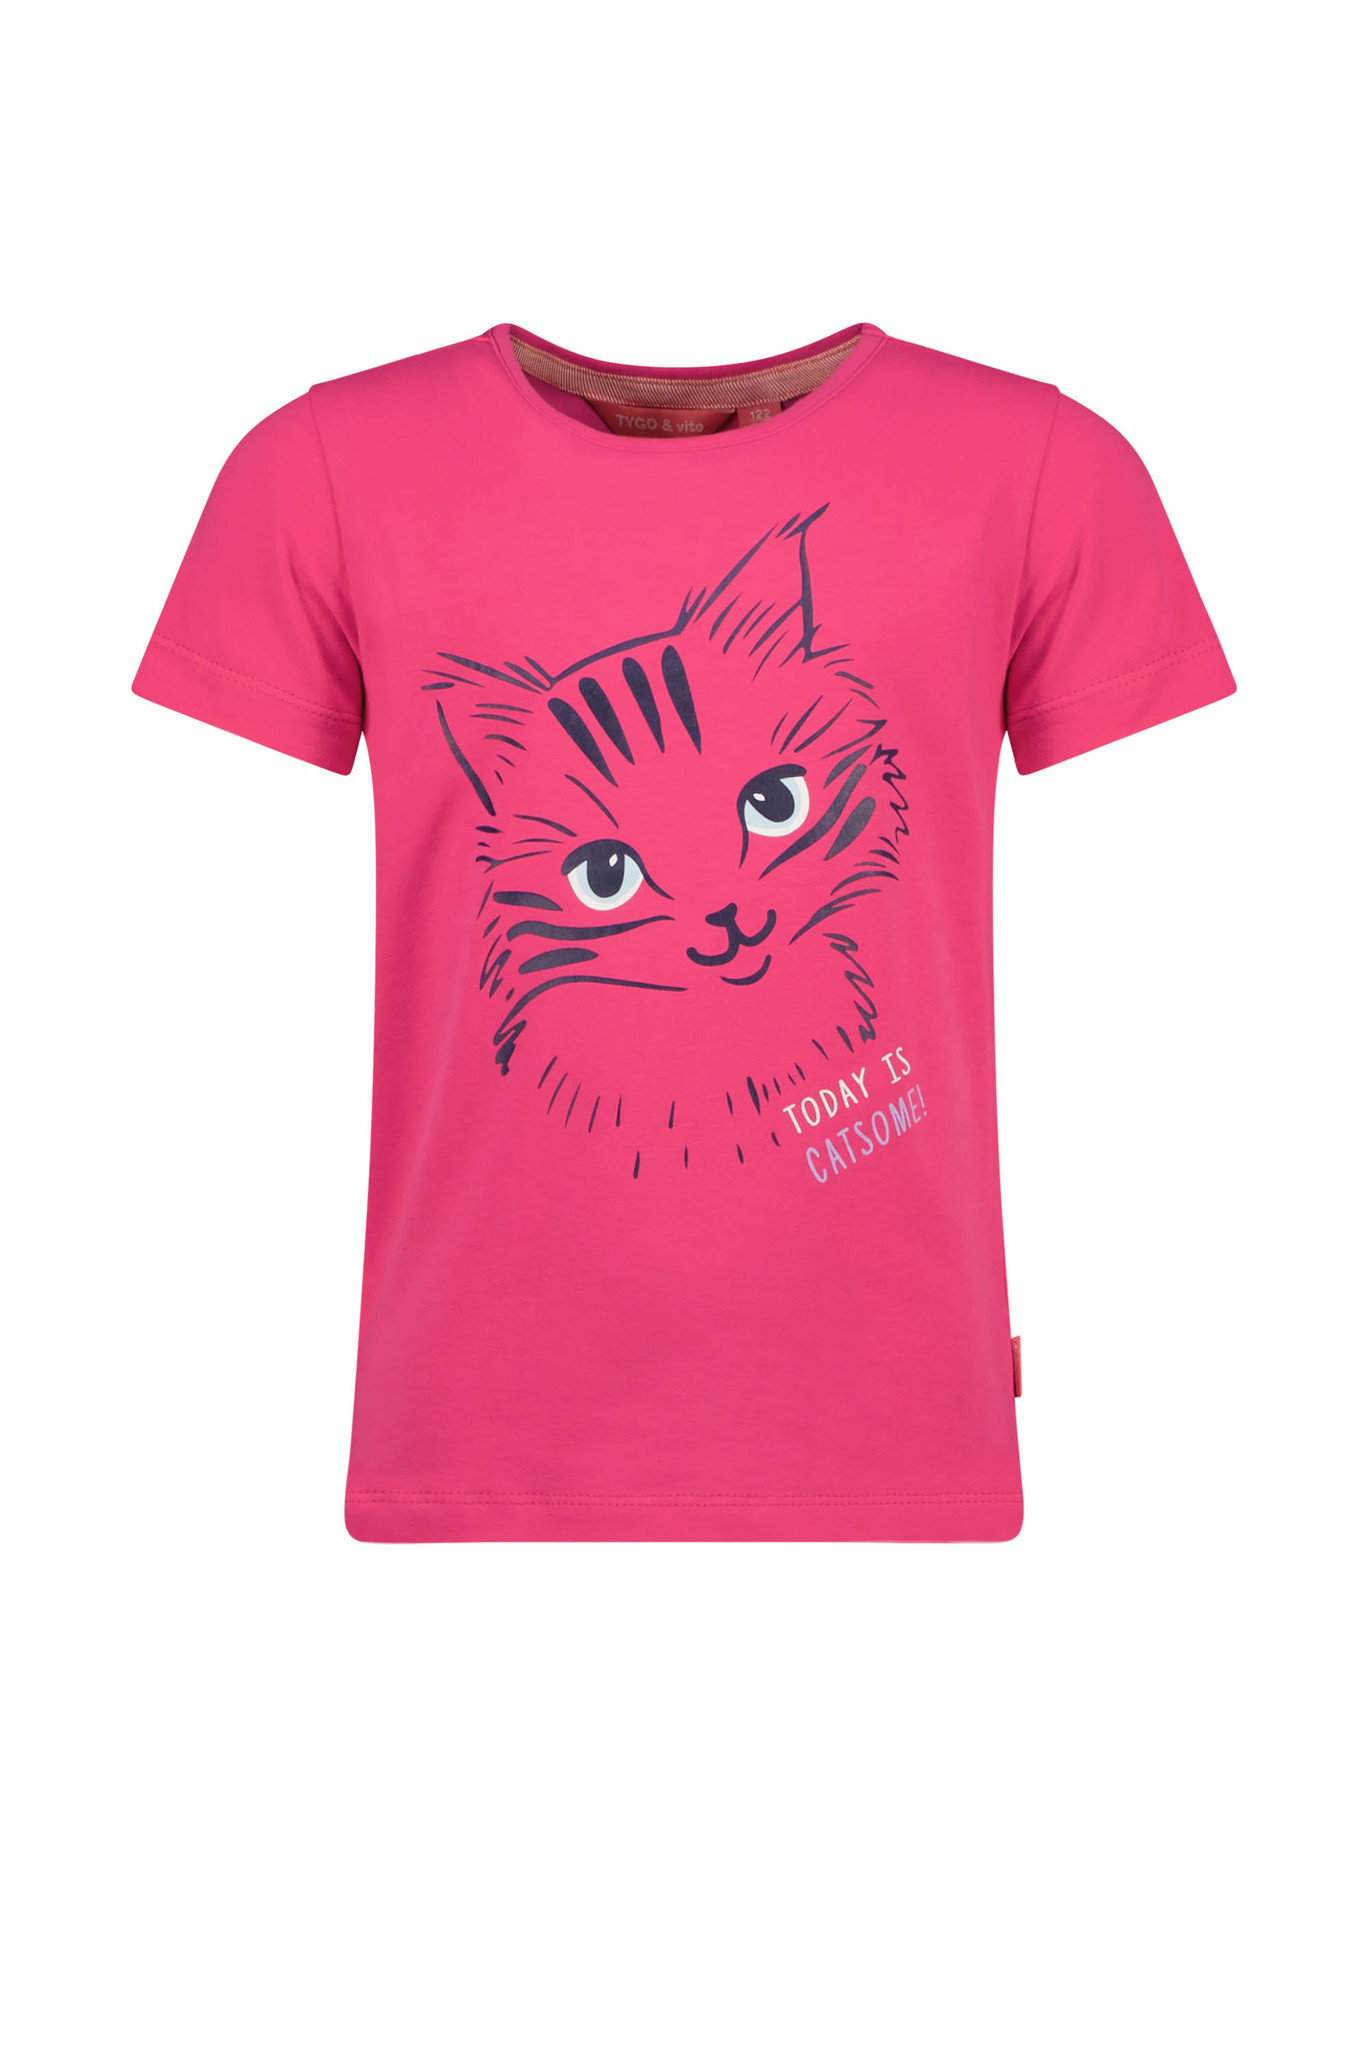 TYGO & vito meisjes t-shirt Today is Catsome Vibrant Pink